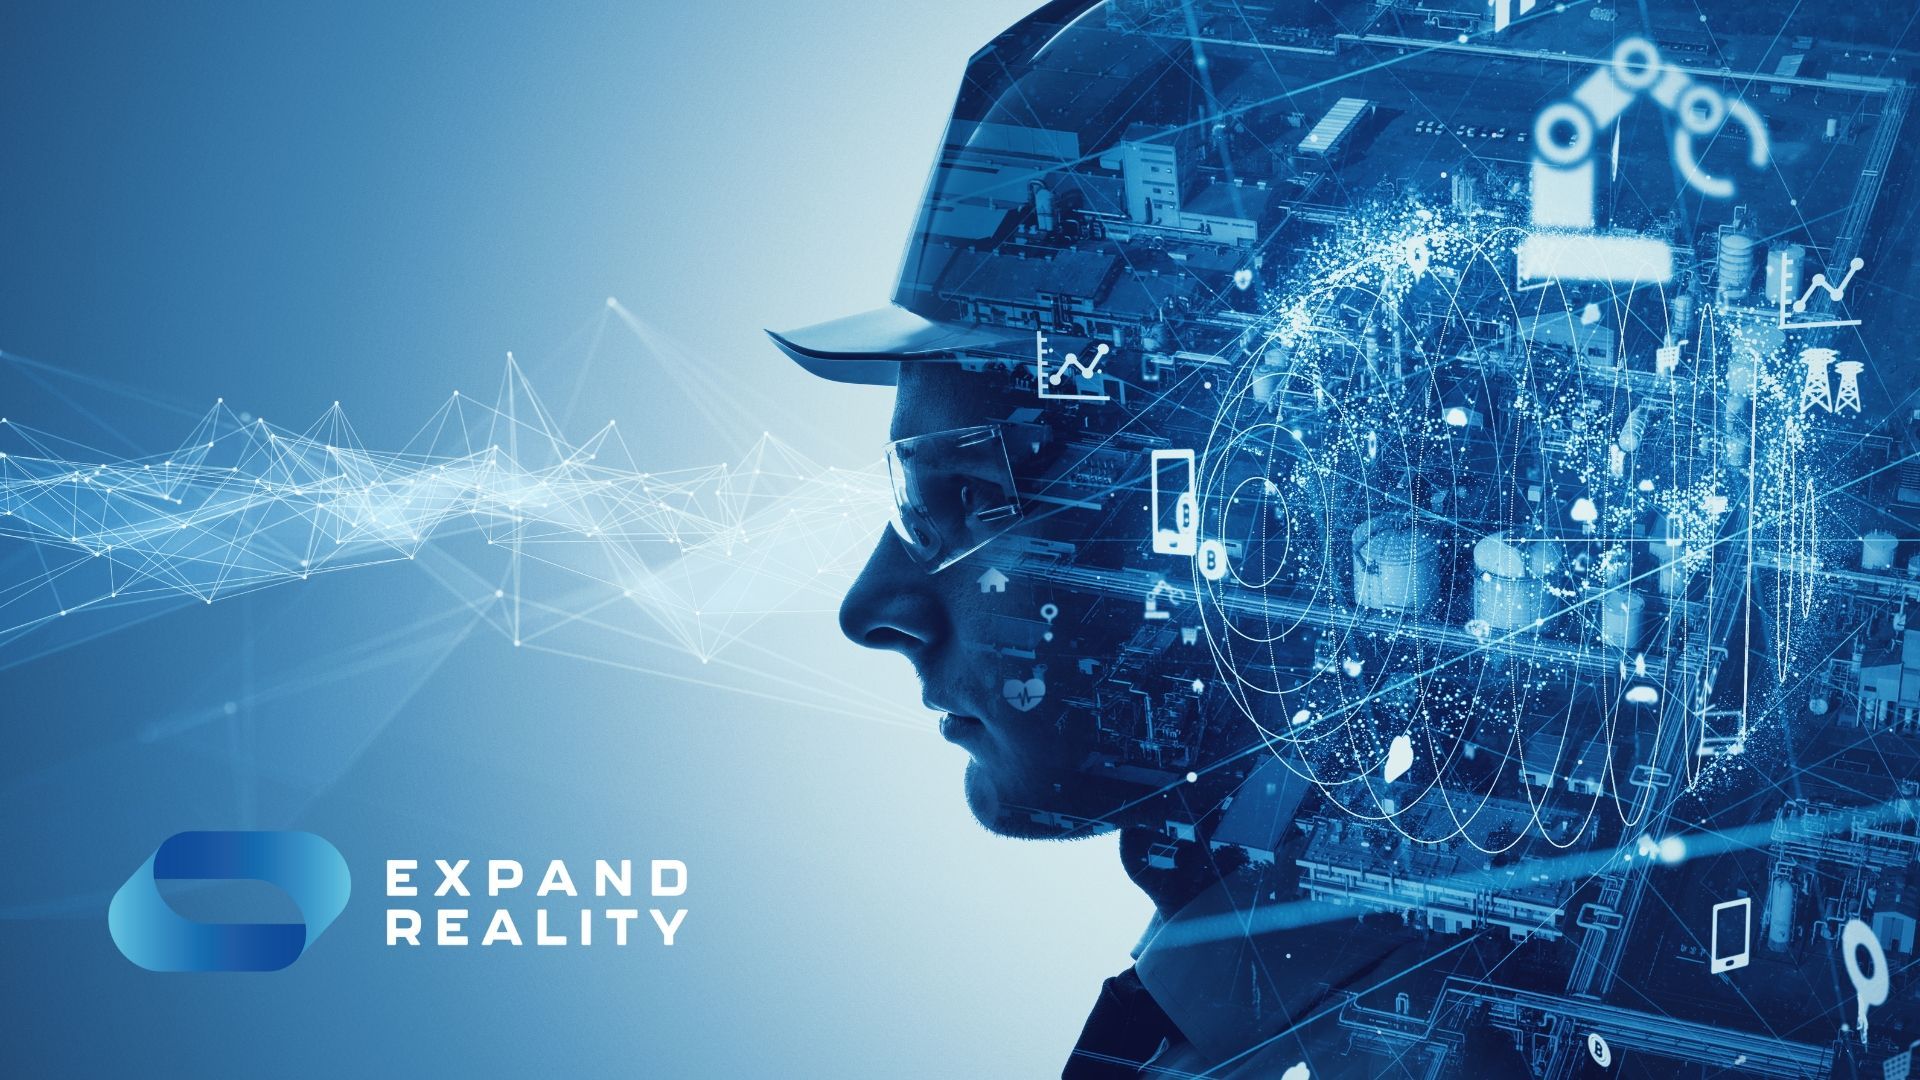 Industry 4.0 is changing modern business and transforming essential services. With XR, you too can join the revolution. Find out more in our guide.